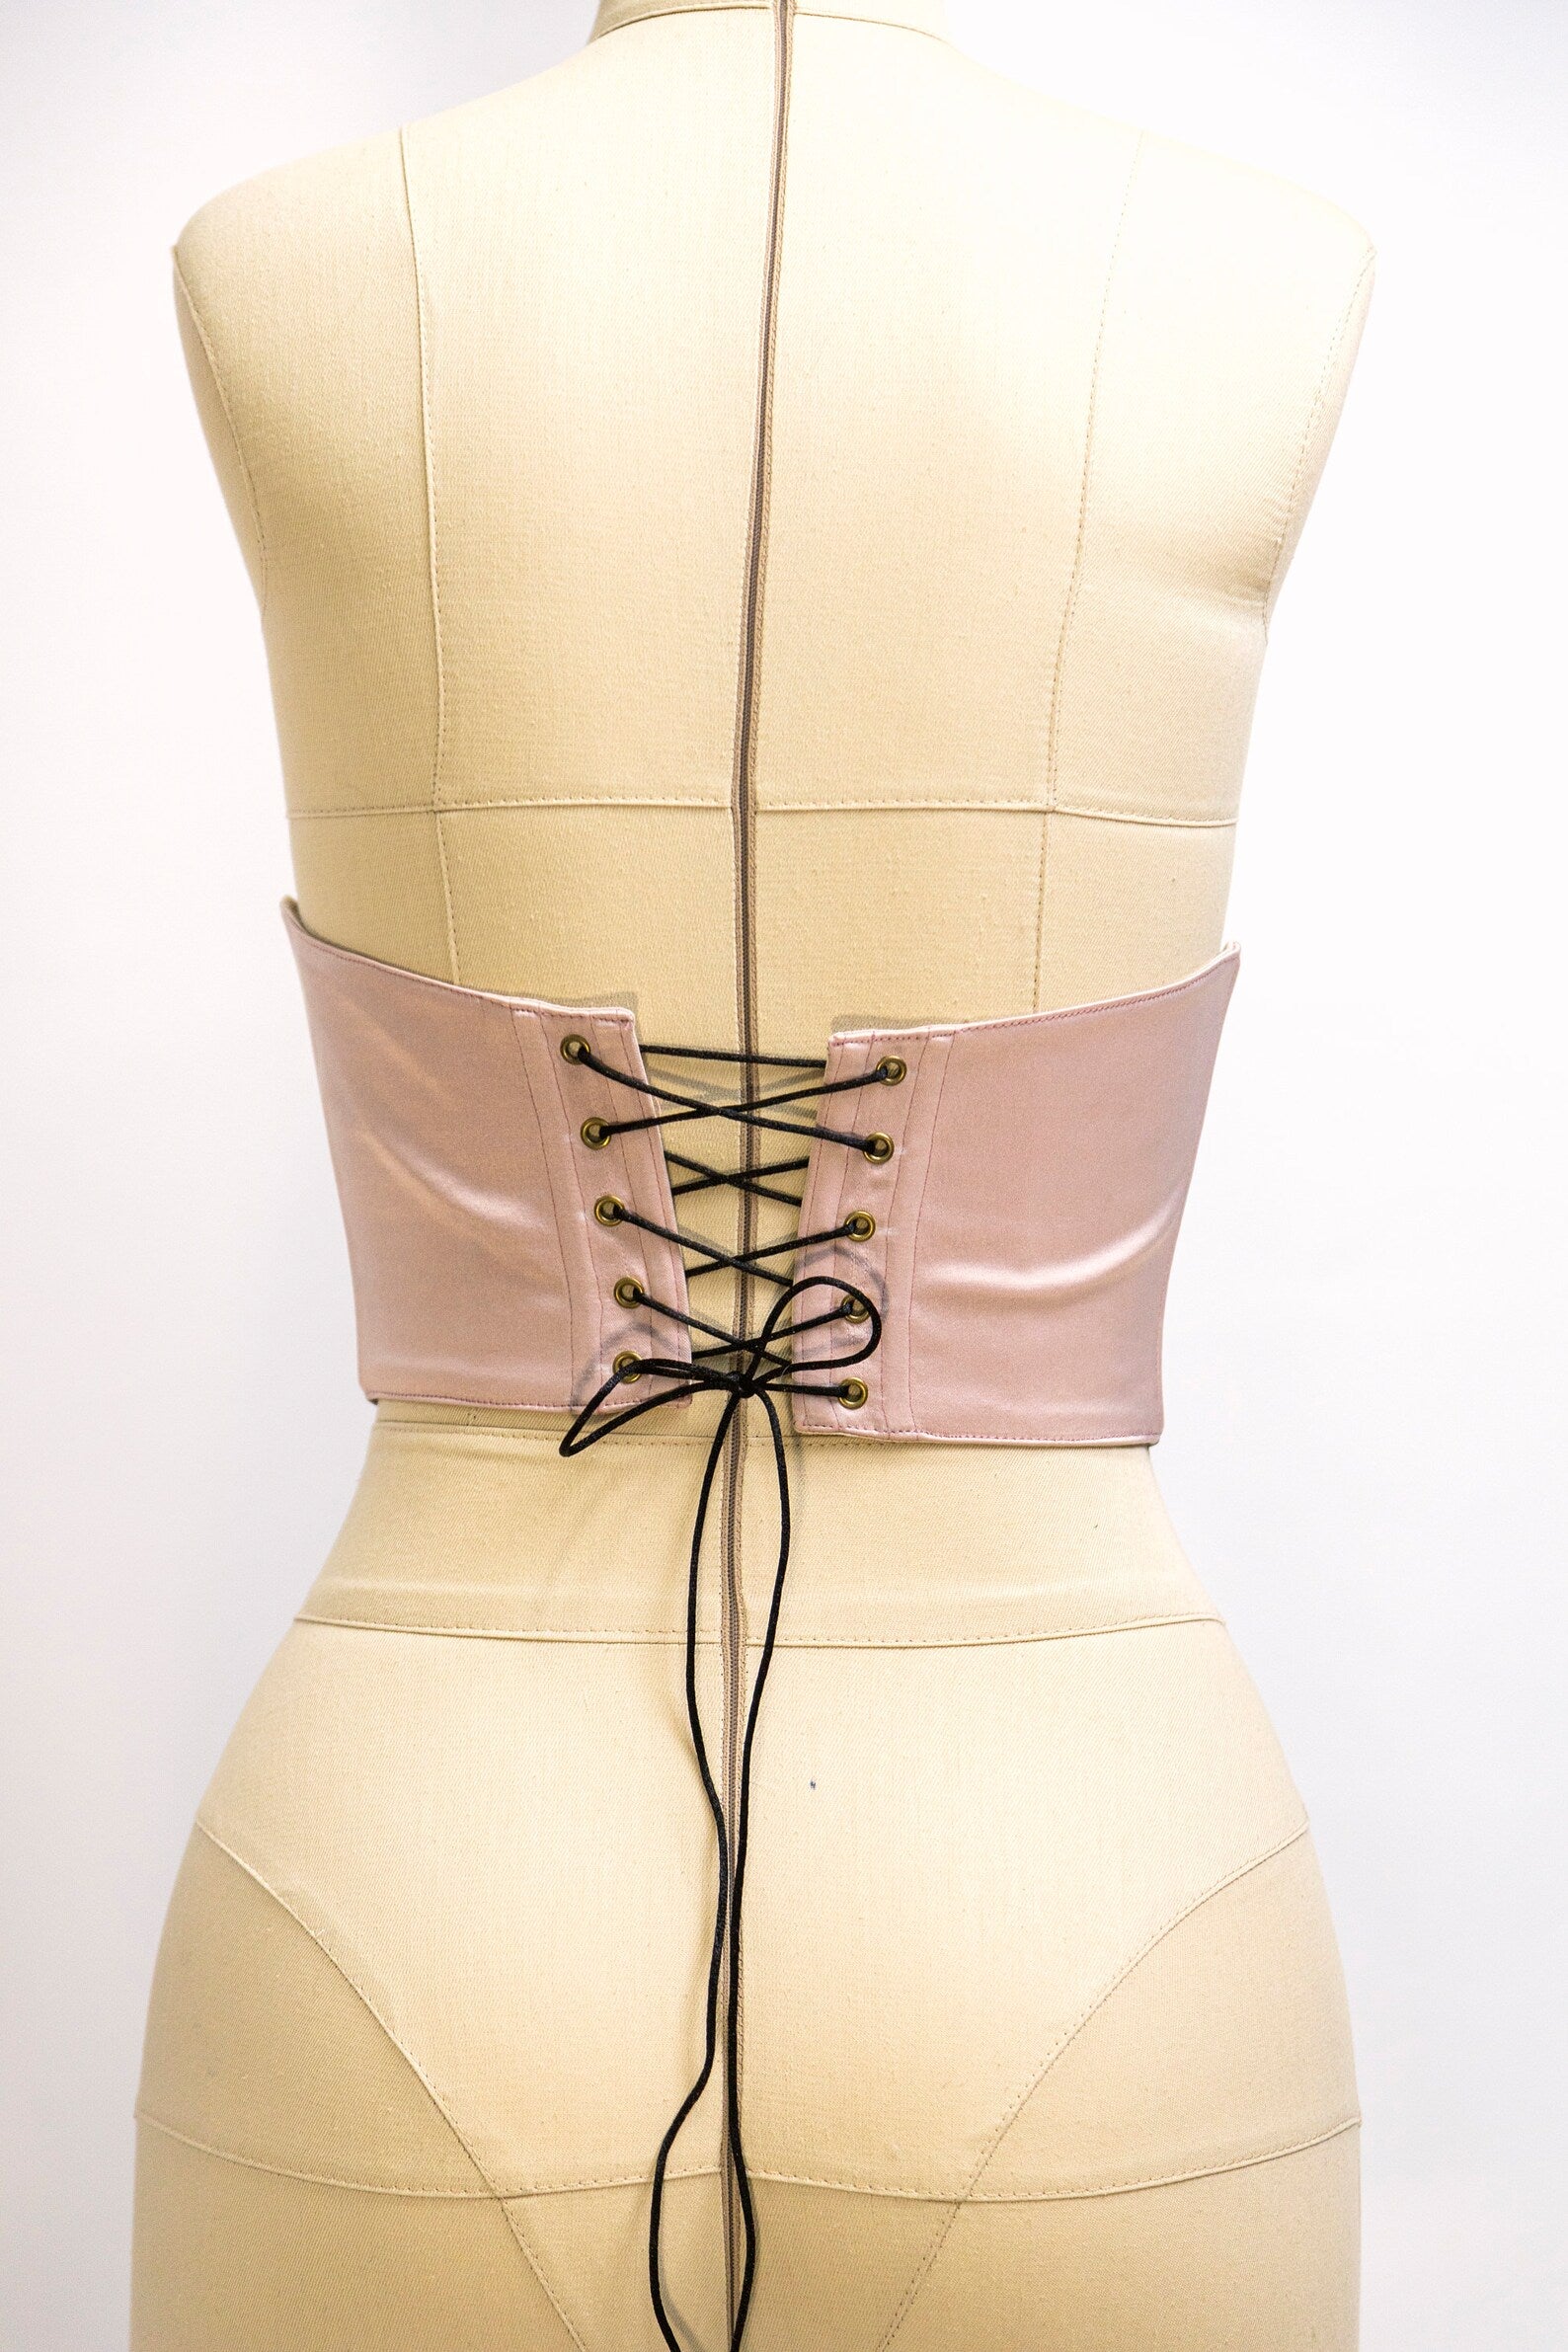 Back View of Pink Floral Underbust Corset